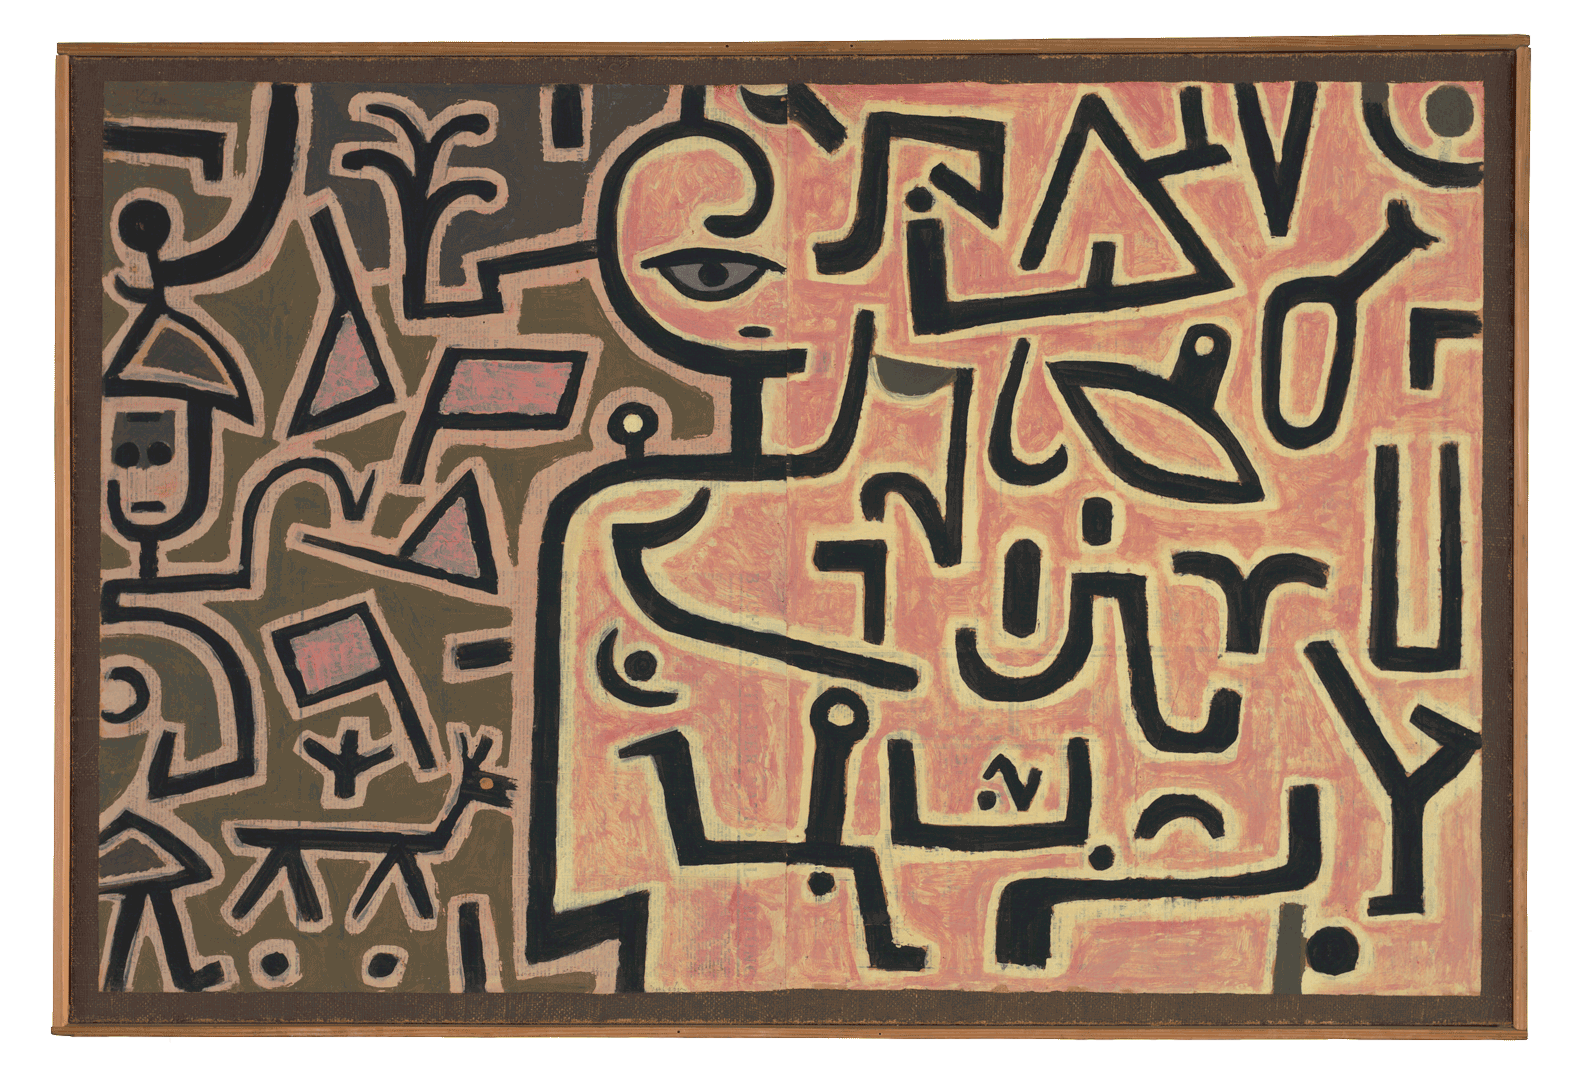 A painting on burlap in original frame by Paul Klee, titled Vorhaben, 1938, 126 Intention, 1938, 126, dated 1938.